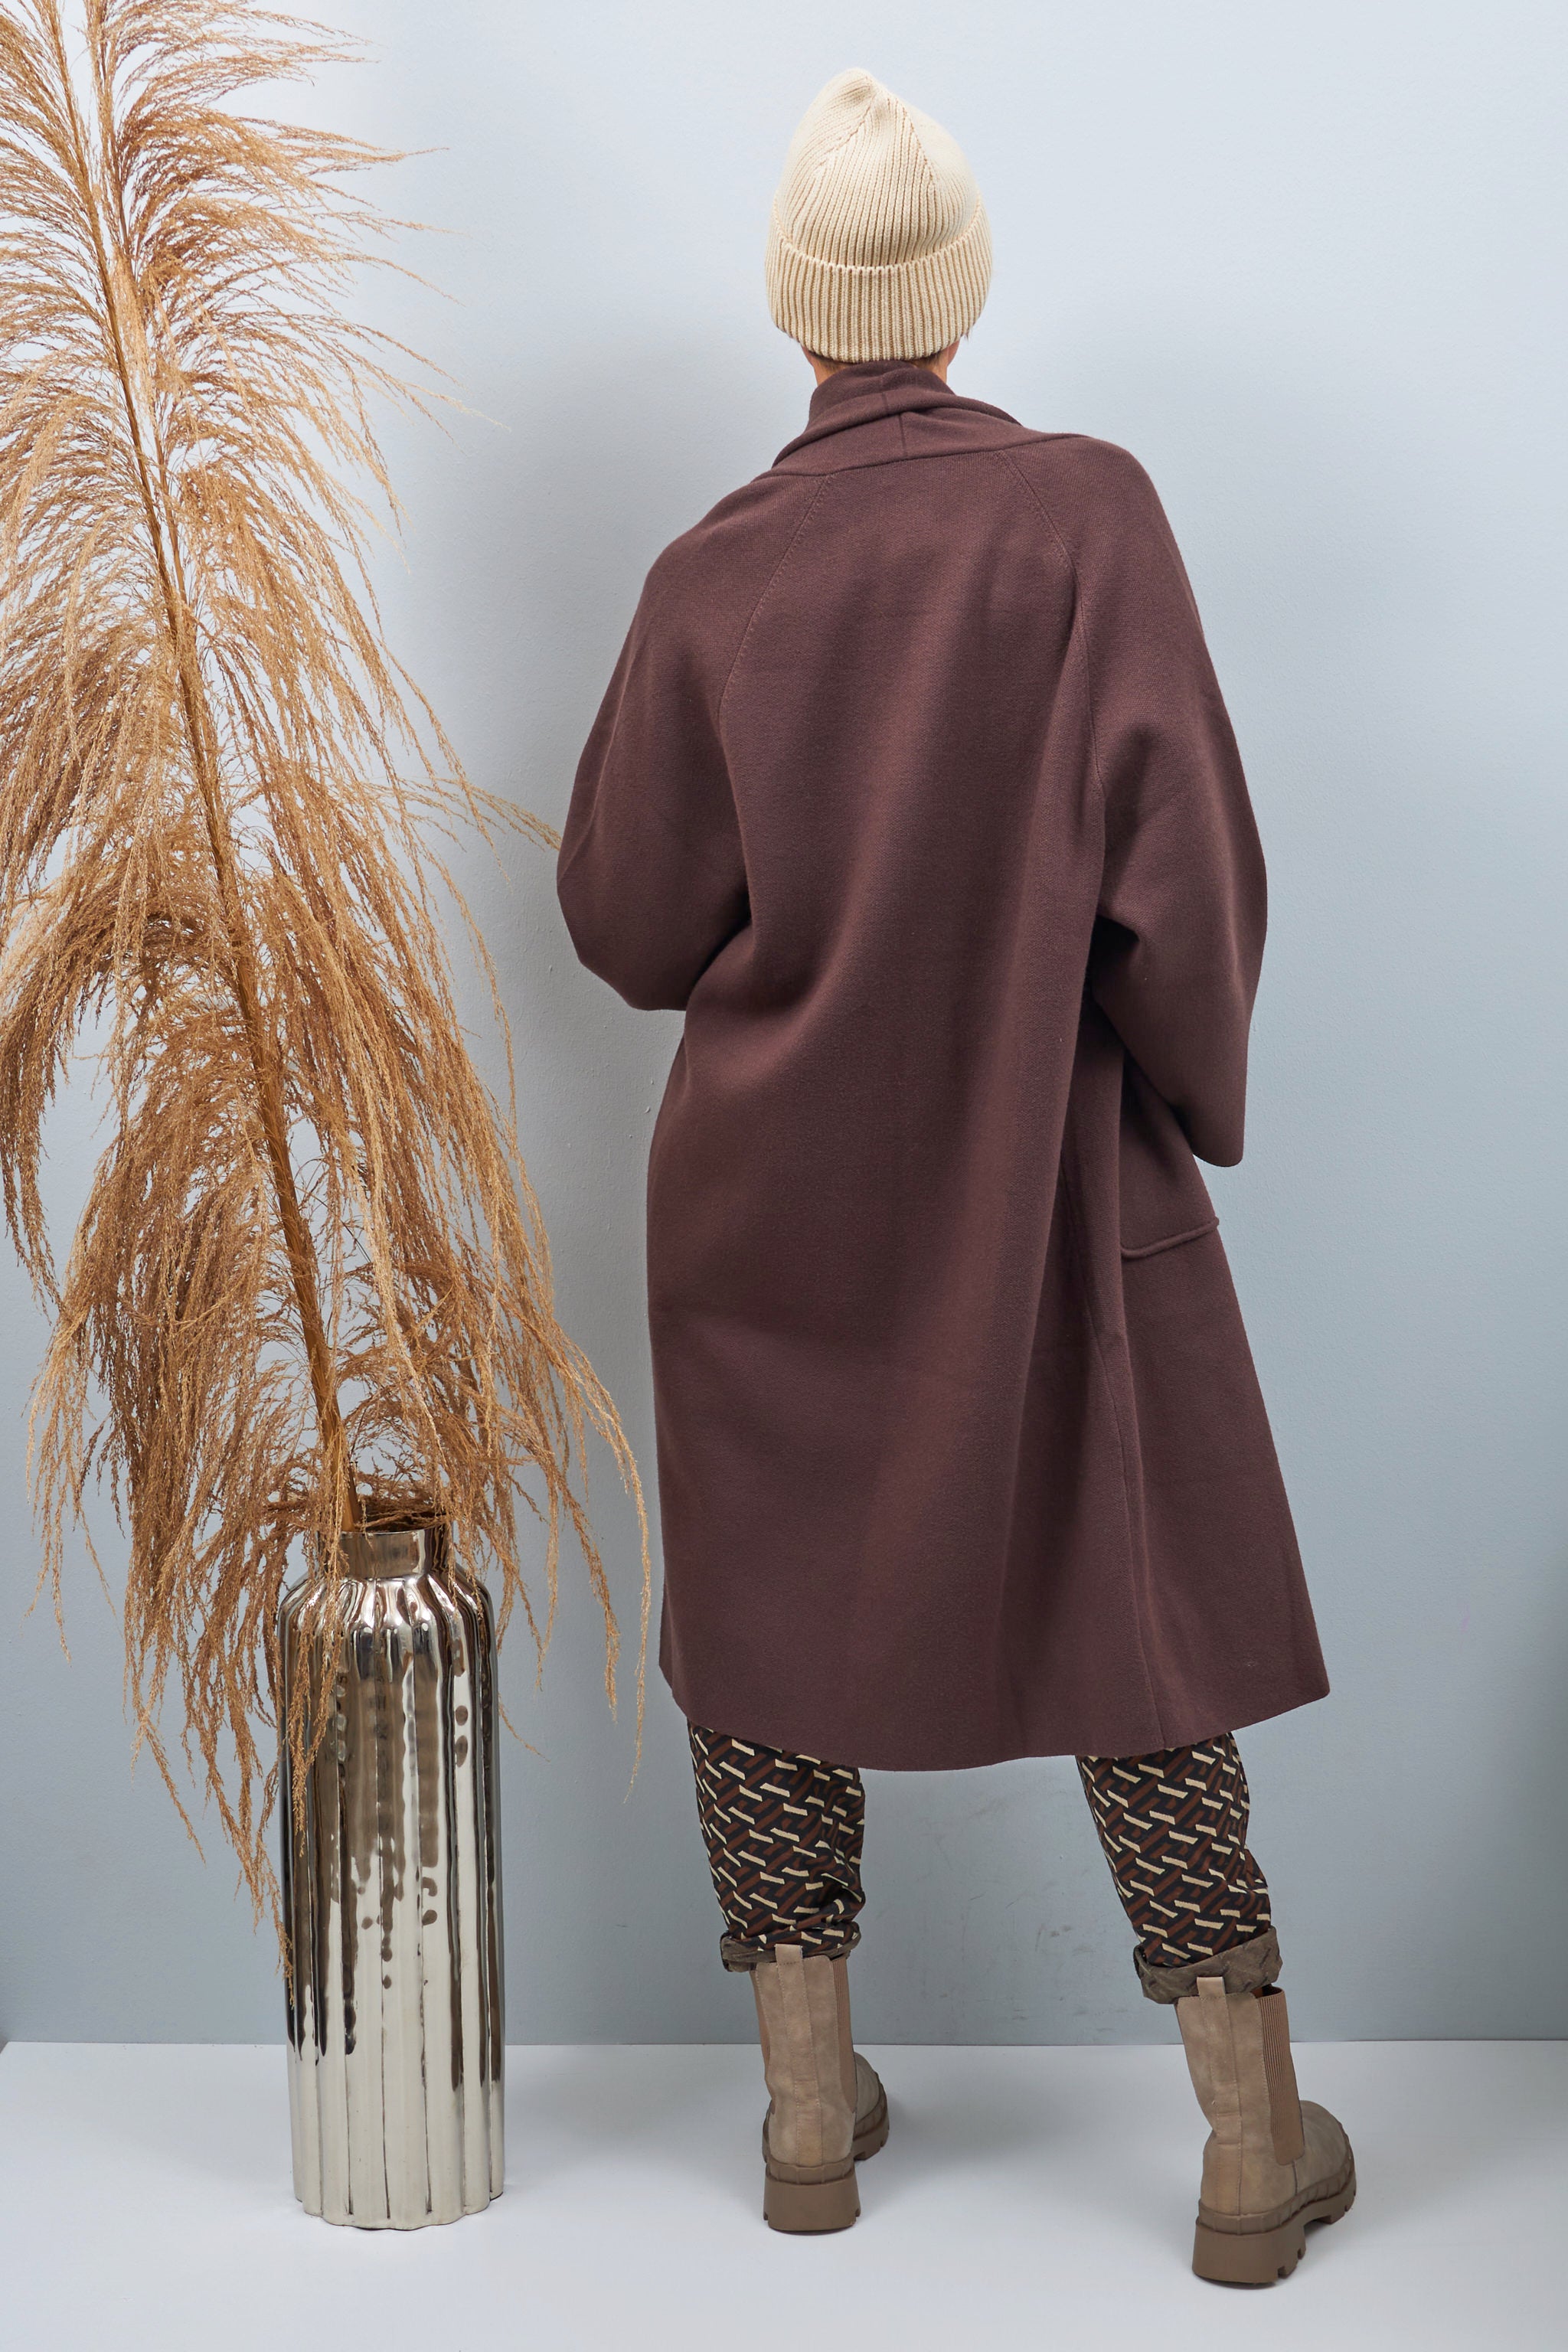 Knit coat with pockets, chocolate brown